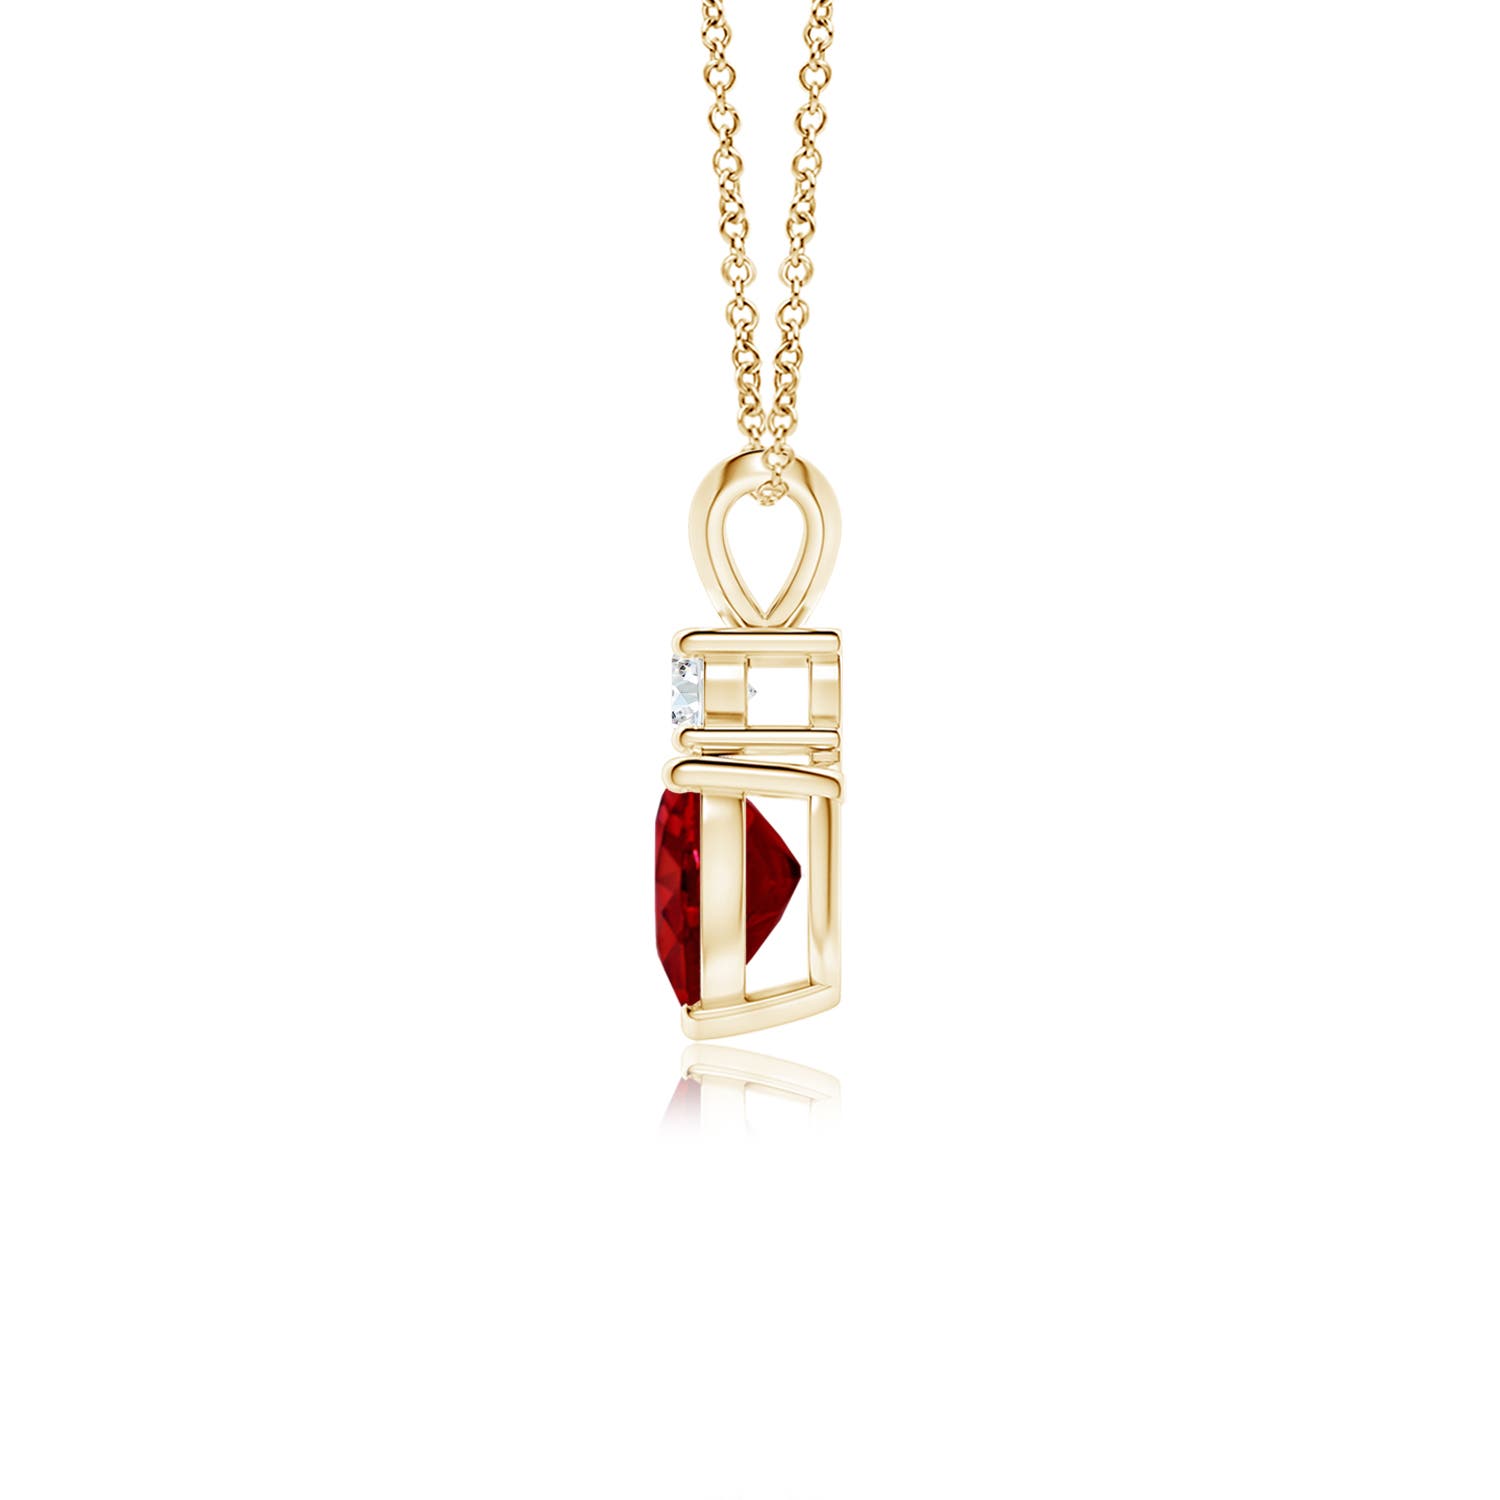 AAAA - Ruby / 0.88 CT / 14 KT Yellow Gold